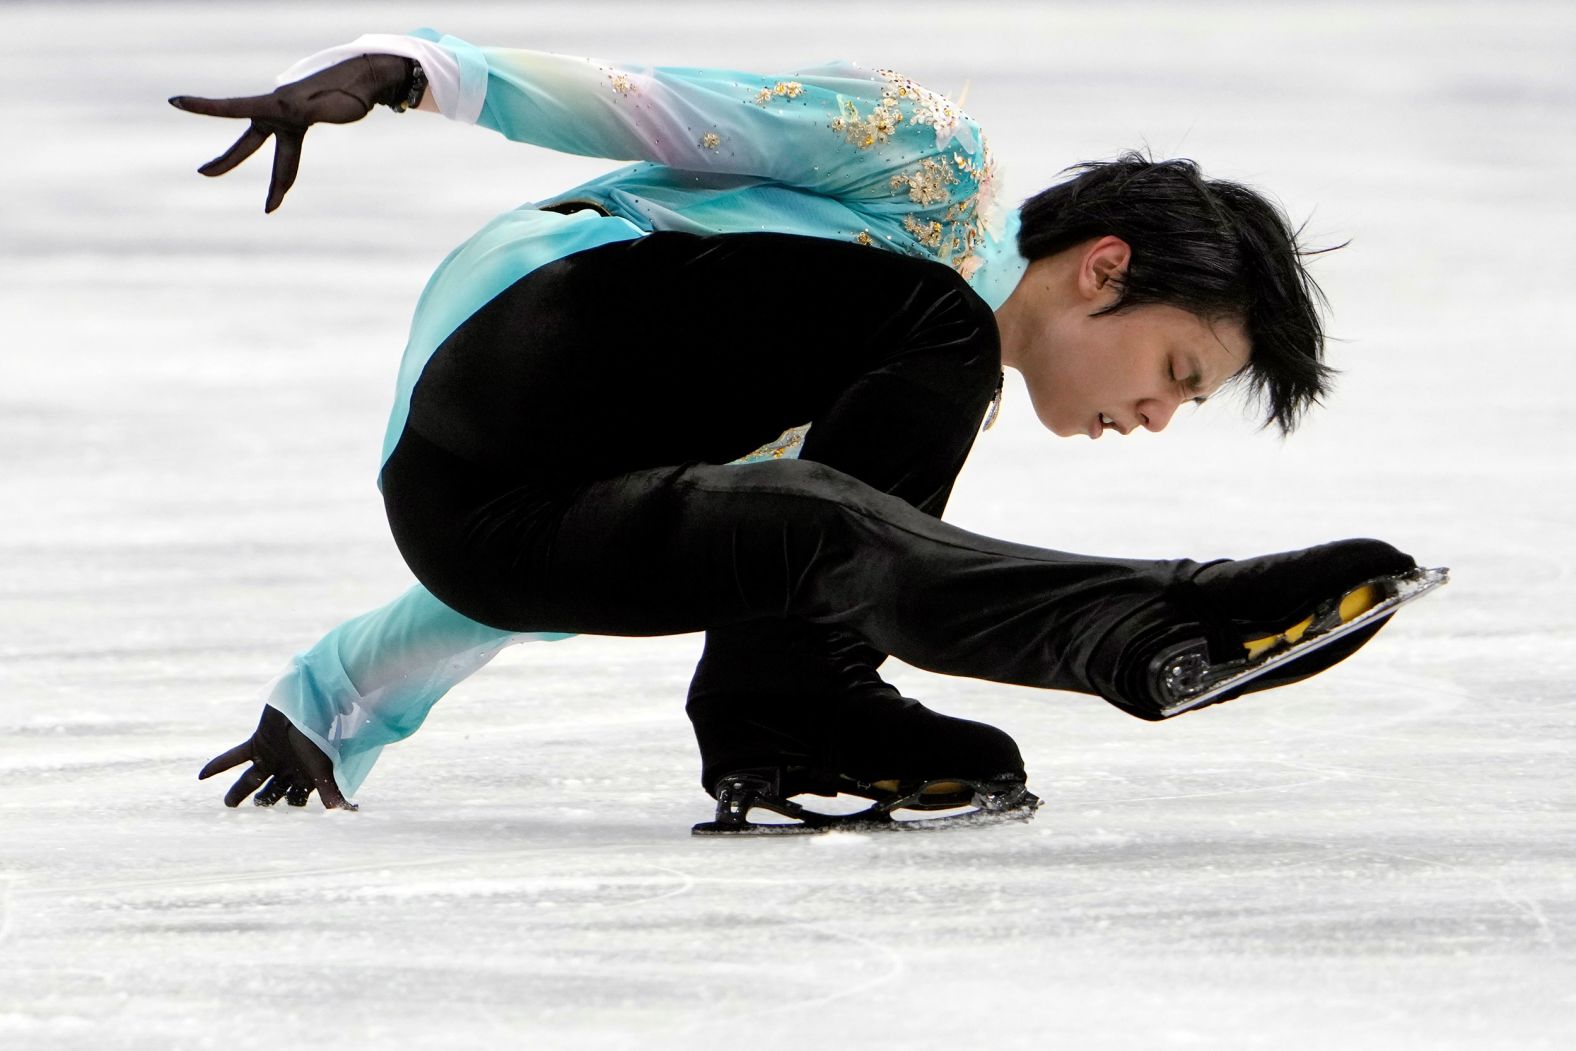 <strong>Yuzuru Hanyu (Japan):</strong> Hanyu, one of the greatest male figure skaters in history, is looking for his third straight Olympic gold in singles. He was just 19 at the 2014 Sochi Games, where he became figure skating's <a href="index.php?page=&url=http%3A%2F%2Fwww.cnn.com%2F2014%2F02%2F14%2Fsport%2Folympics-day-seven-hanyu%2Findex.html" target="_blank">youngest Olympic champion since 1948.</a> He also became the first Asian skater to win the men's singles title. Hanyu's fans throw Winnie the Pooh bears on the ice after he performs; <a href="index.php?page=&url=https%3A%2F%2Fwww.cnn.com%2F2018%2F02%2F16%2Fsport%2Fyuzuru-hanyu-winnie-the-pooh%2Findex.html" target="_blank">the tradition</a> started after he began carrying a tissue box in the shape of the character back in 2010.